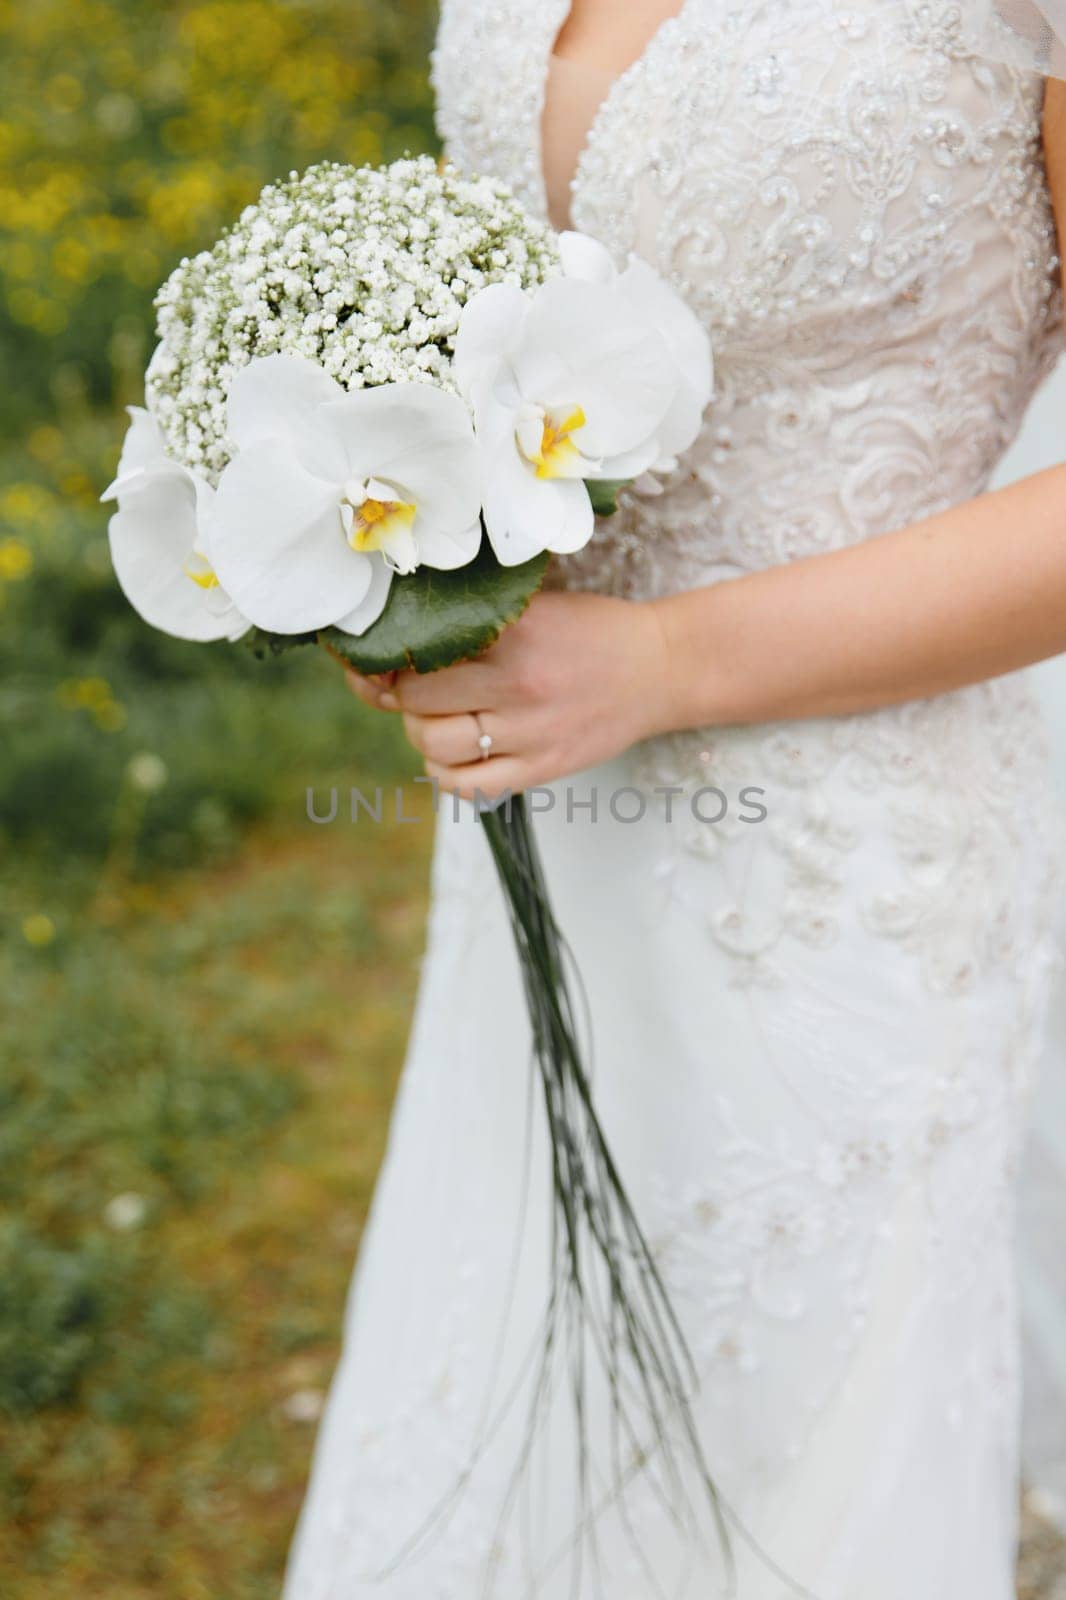 The bride is holding a wedding bouquet. No face.